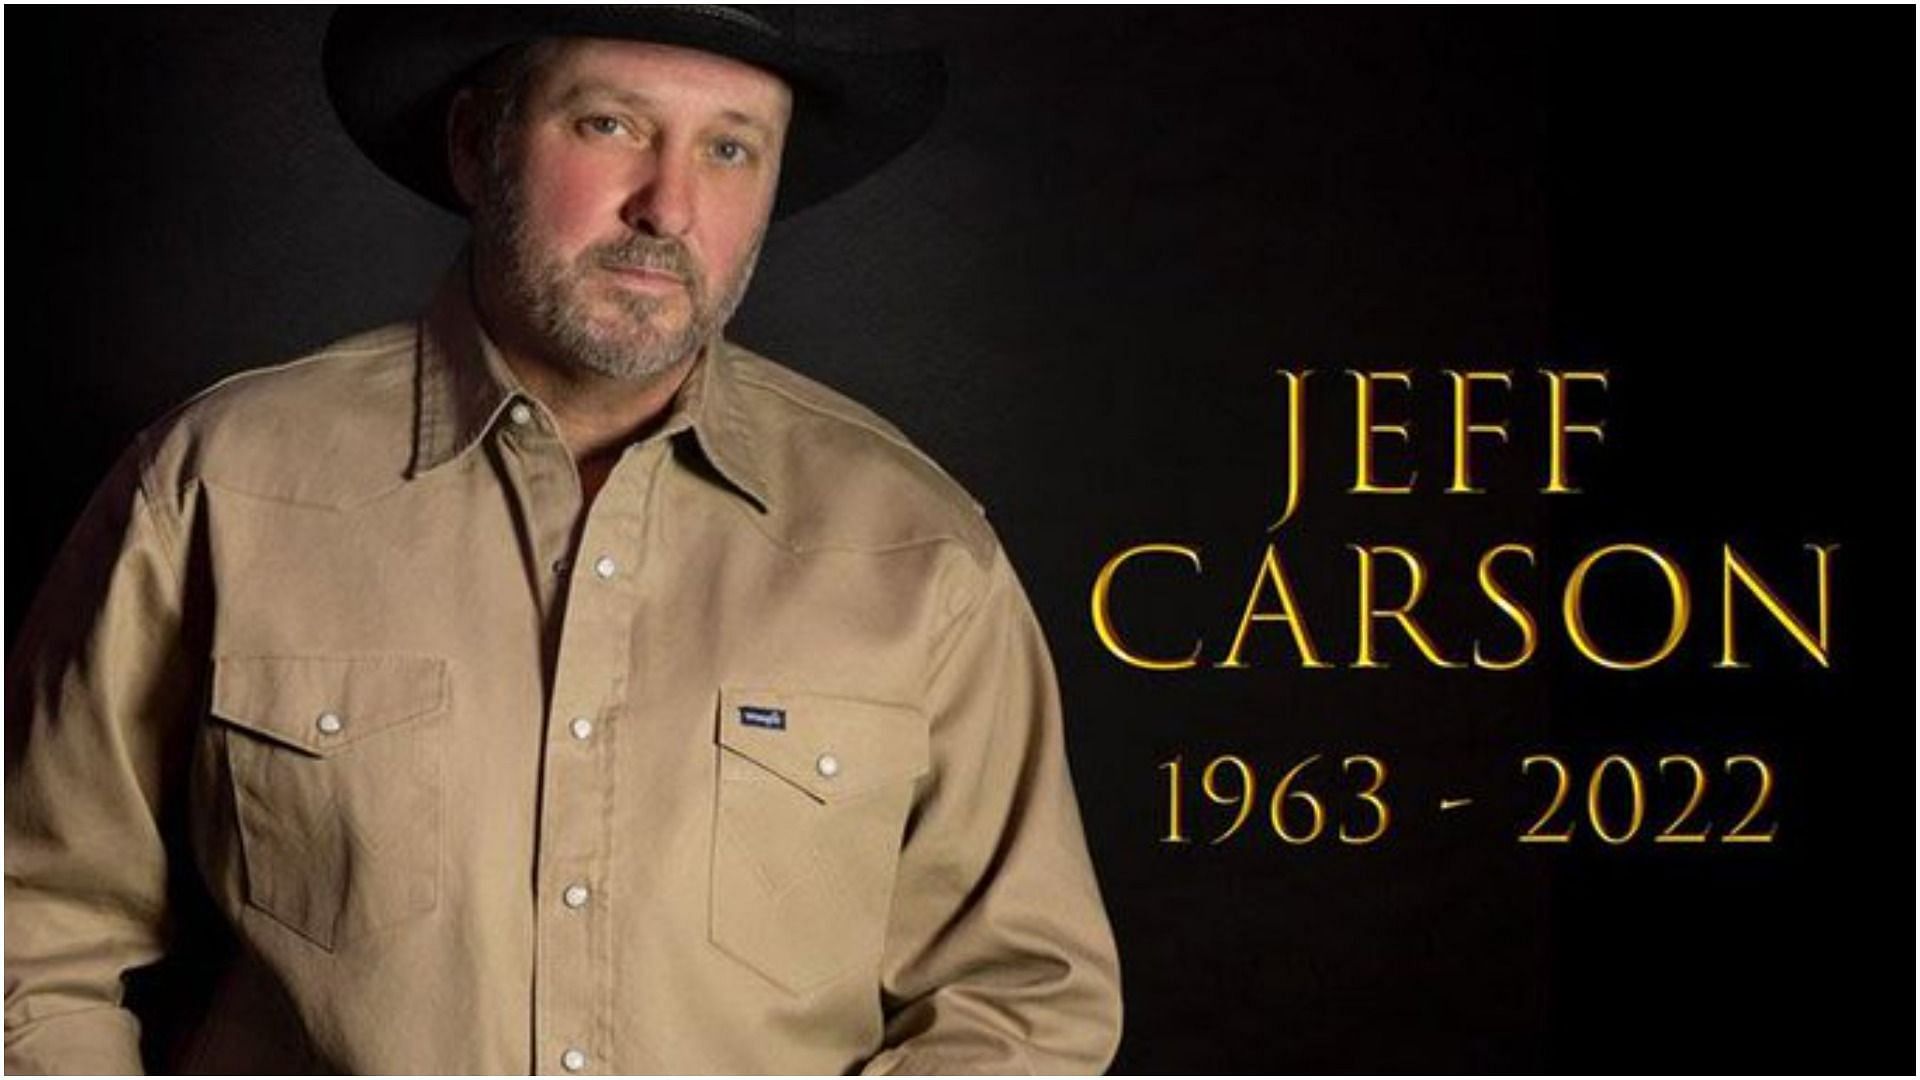 Jeff Carson recently died at the age of 58 (Image via aManda4aNderson/Twitter)